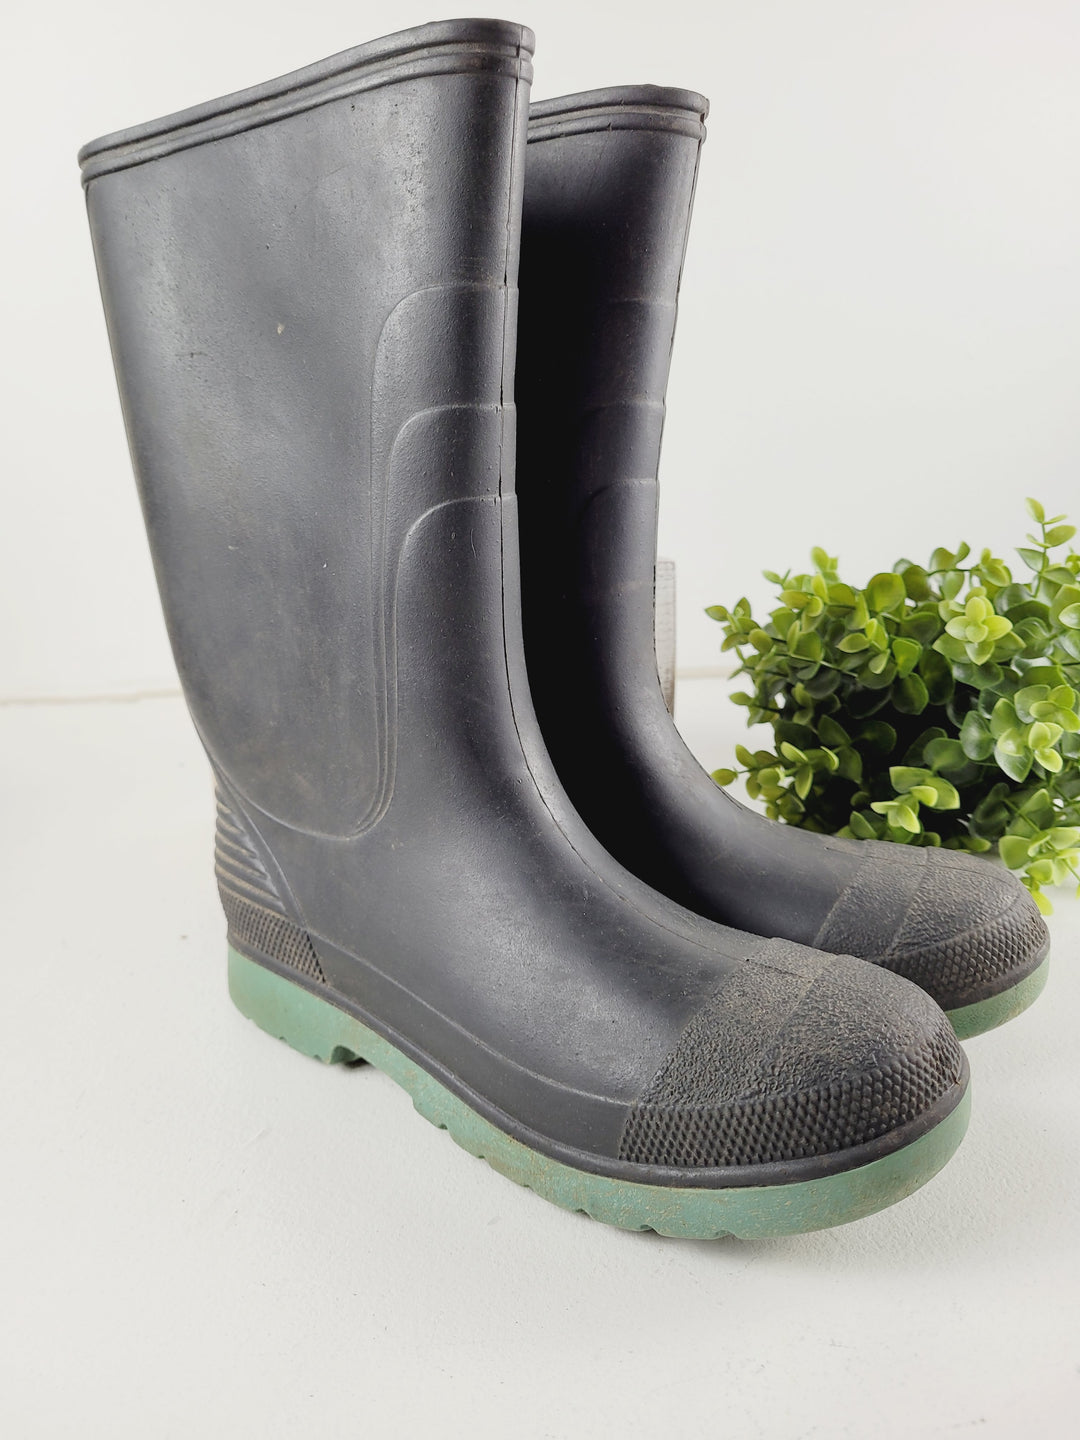 GREEN/BLACK RUBBER BOOTS SIZE 6 YOUTH VGUC